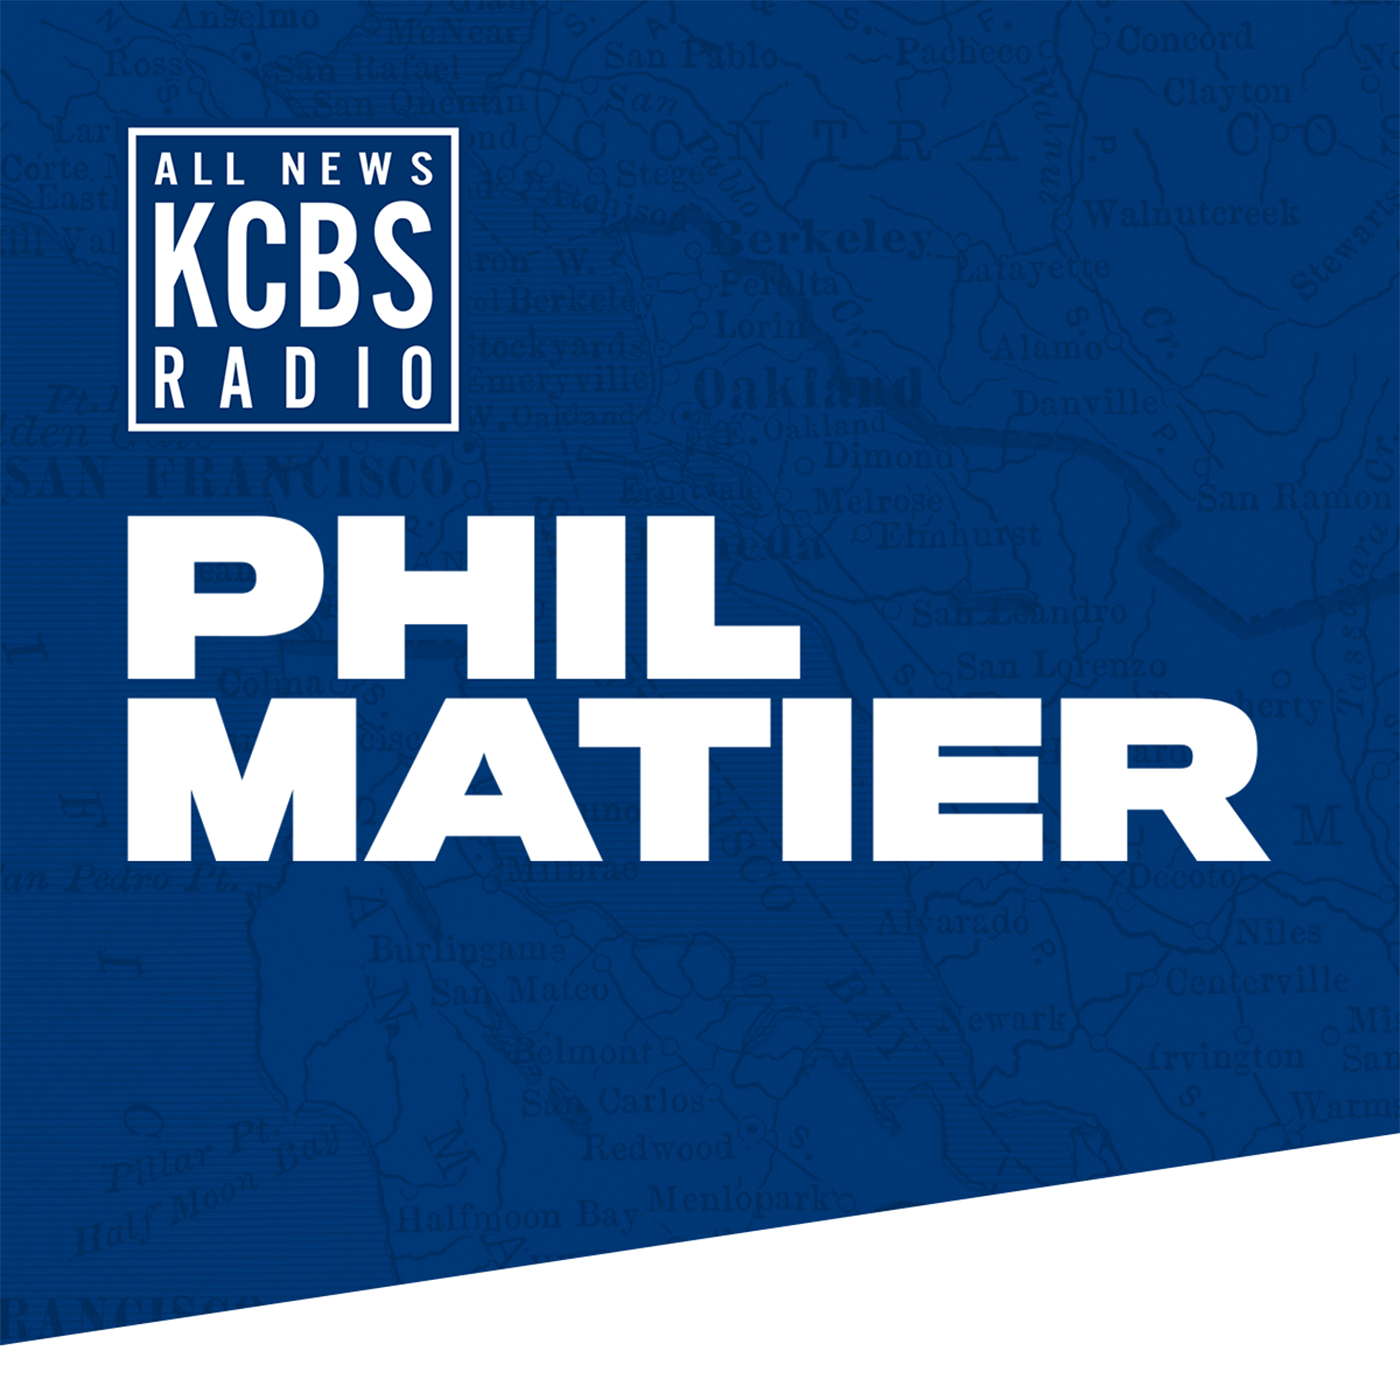 Phil Matier:  Recent thefts are highlighting police constraints